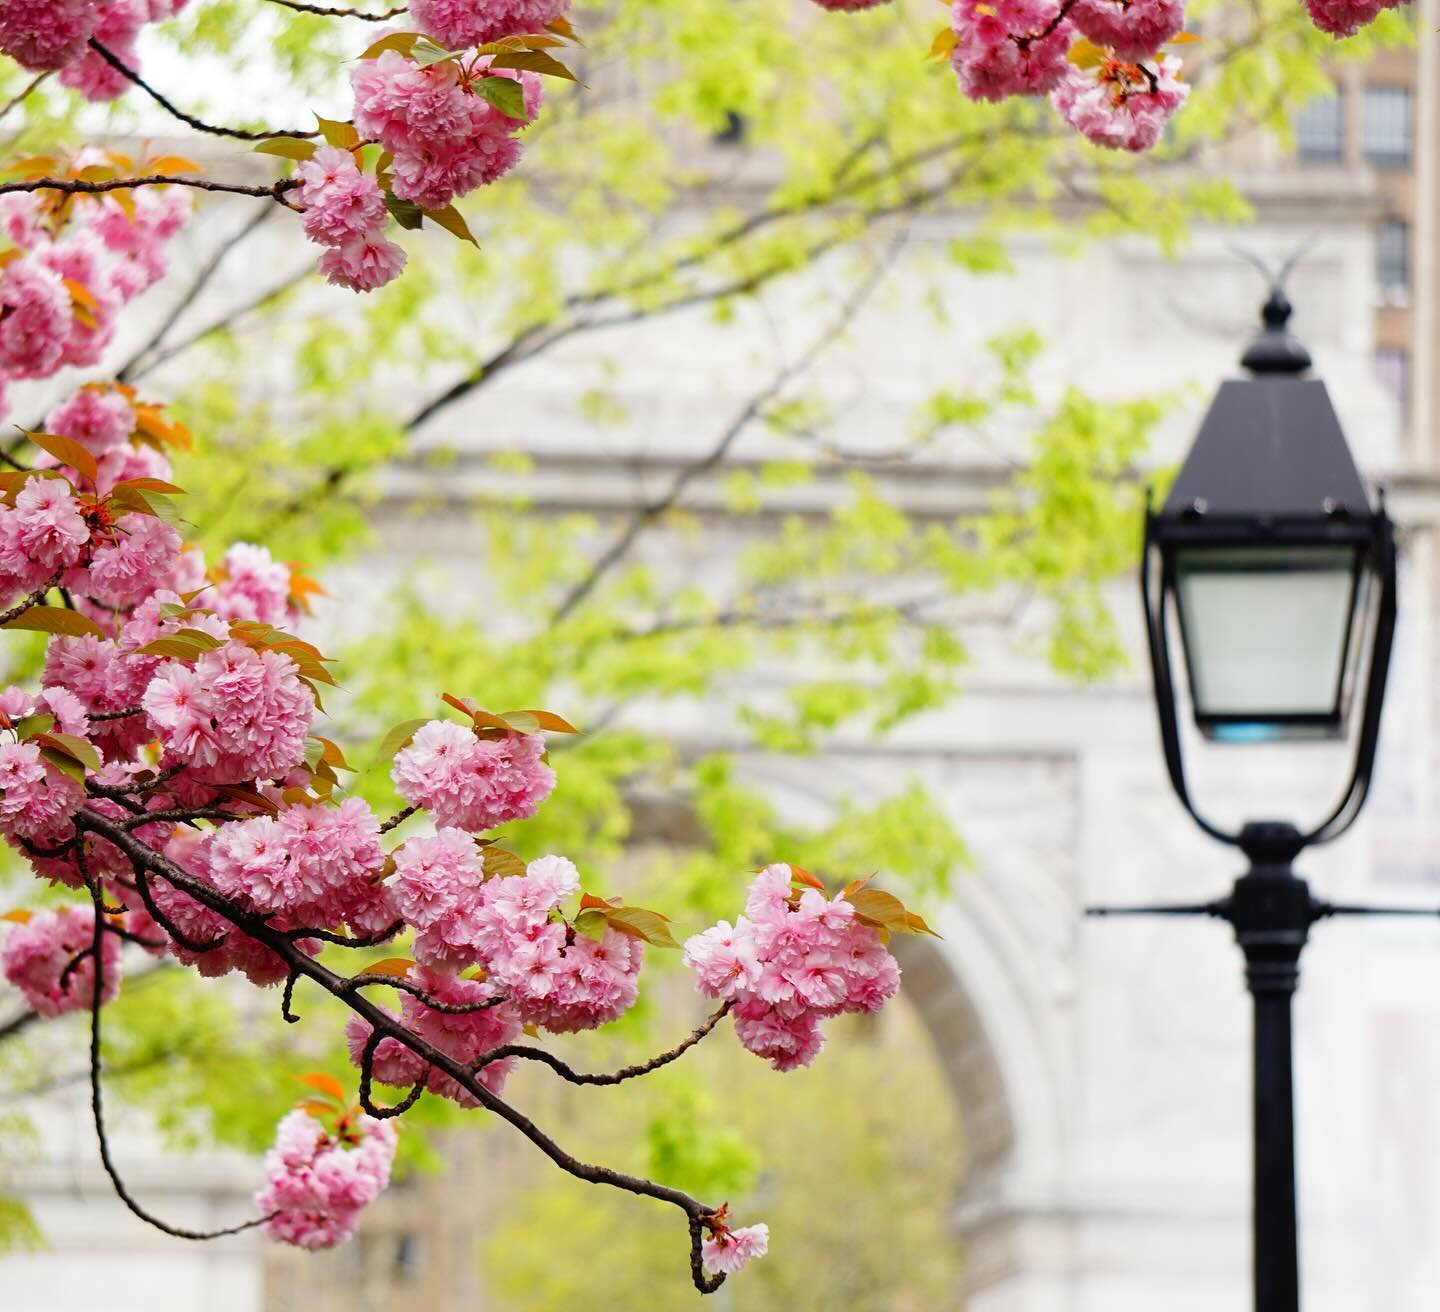 Blossom brings hope of bright days ahead &amp; that Spring is here🌸 I love the contrasting shape, colour &amp; texture against The Arch in this image plus the lamppost adds another interesting element to the scene
.
.
.
#nyc #washingtonsquarepark #w